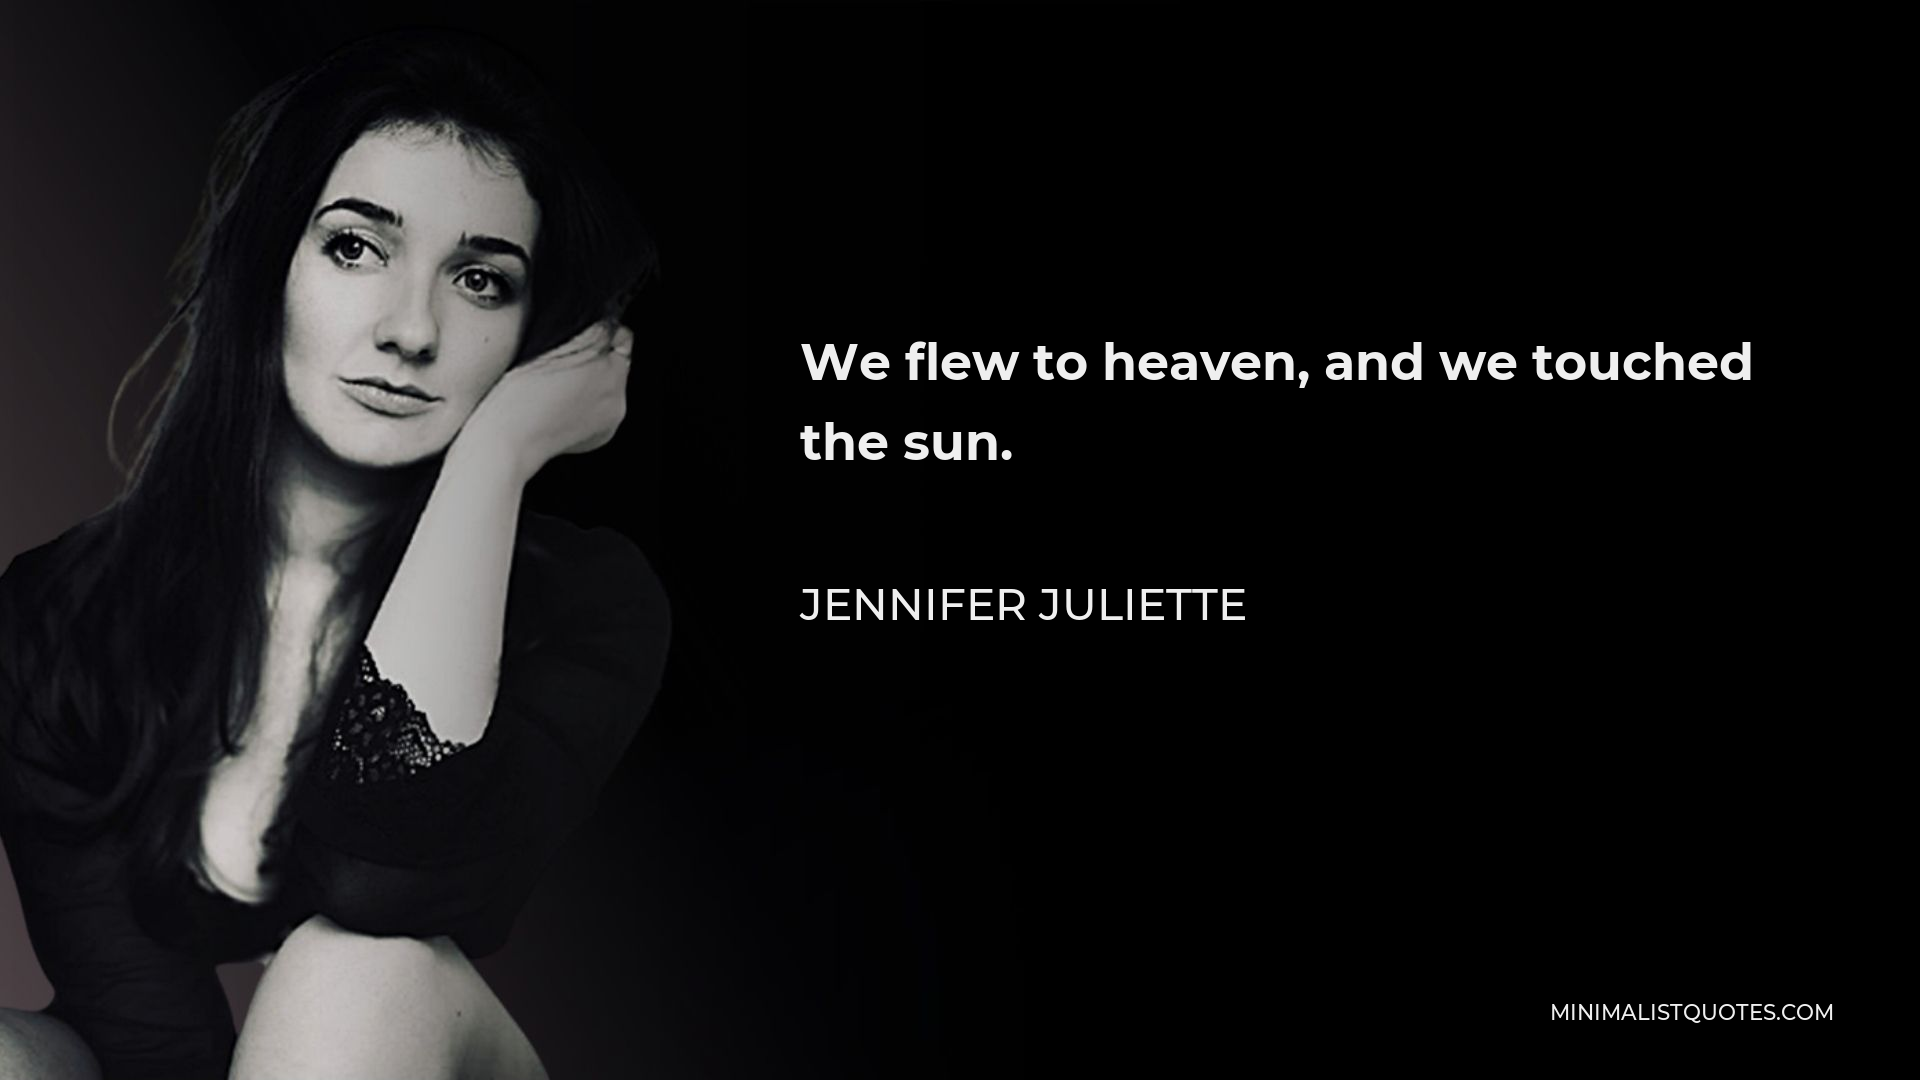 Jennifer Juliette Quote - We flew to heaven, and we touched the sun.